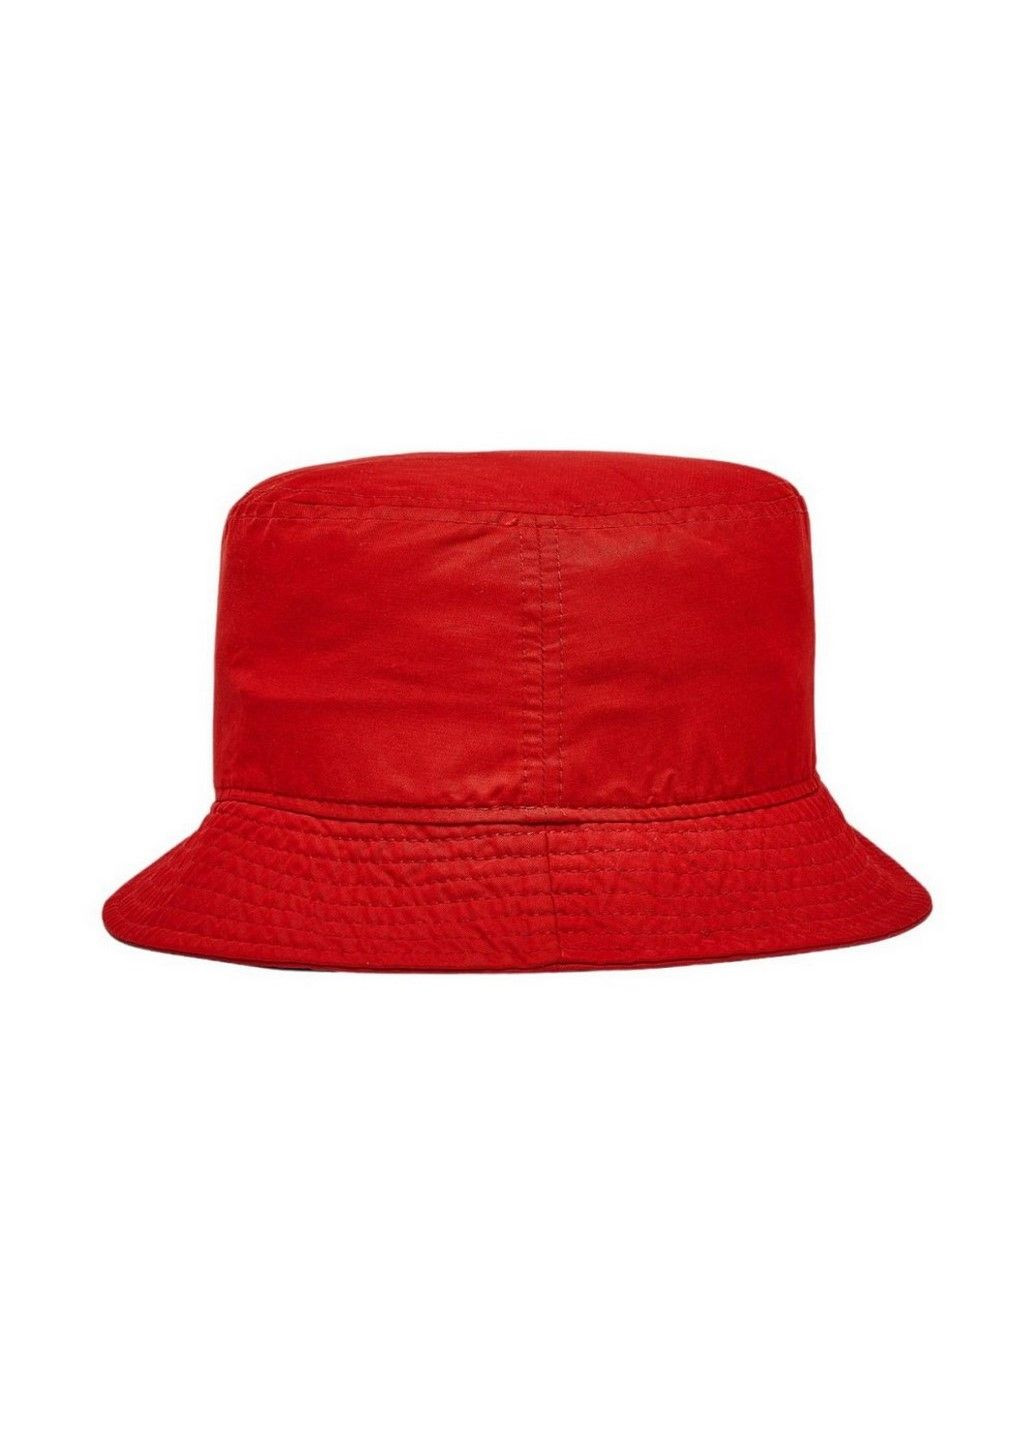 Панама BUCKET JM WASHED CAP DC3687-687 Nike (285794817)